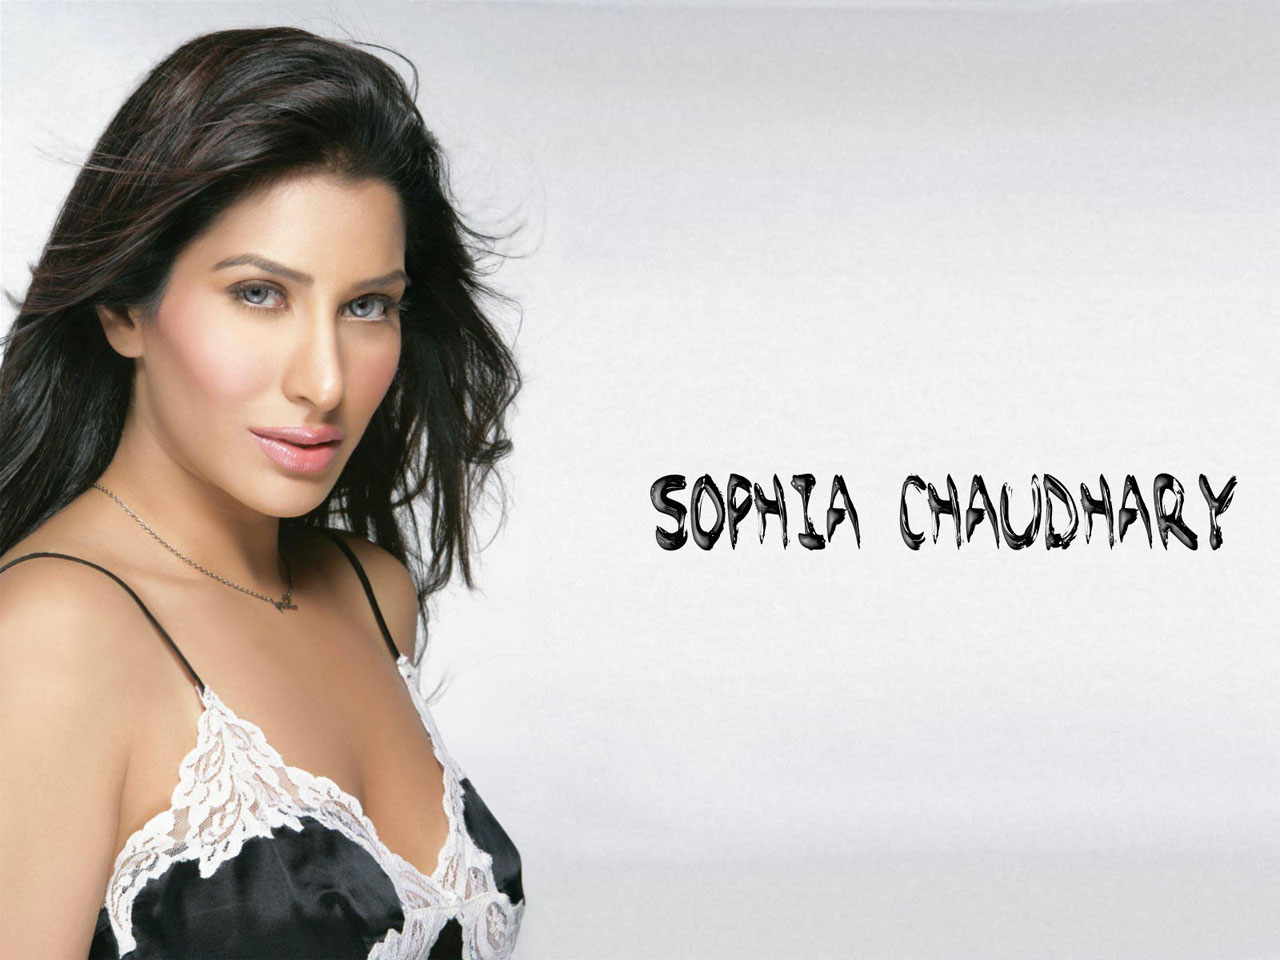 Sophie Chaudhary - Photo Actress